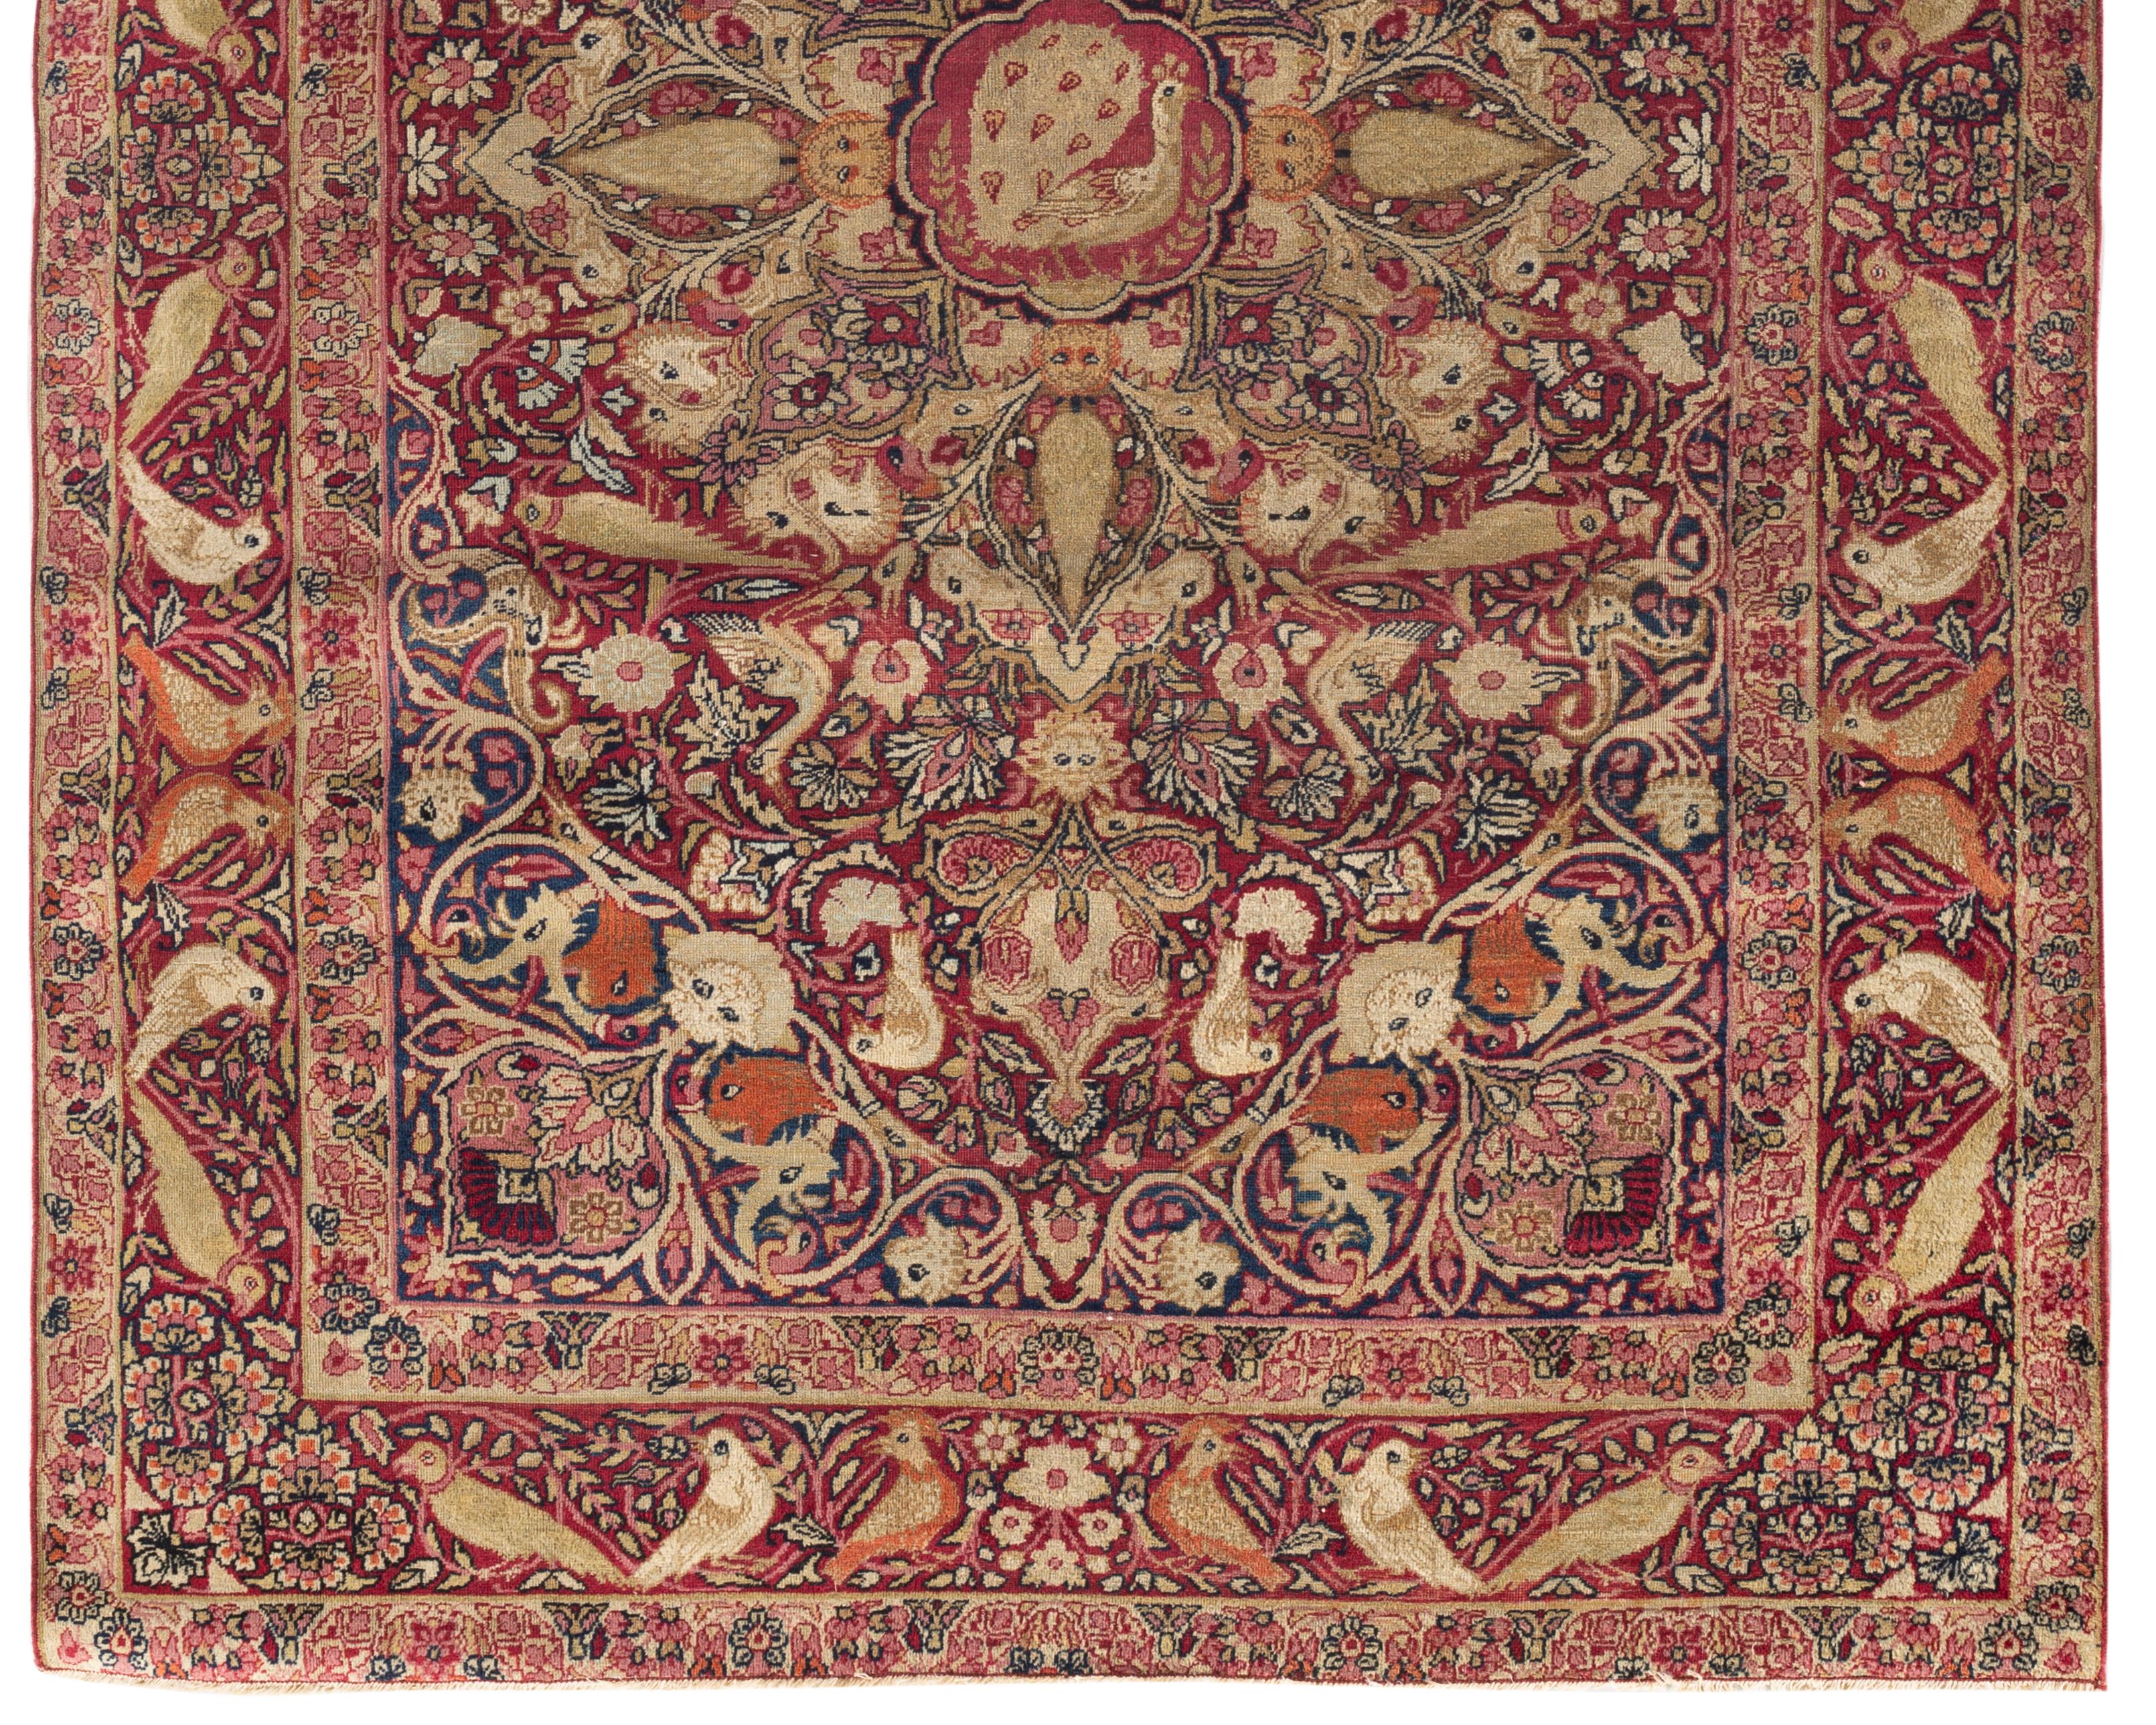 Antique Persian Kirman Lavar Rug circa 1880. Some of the finest rugs in the world come from the famous weaving area known as Lavar or Ravar. Situated around 60 miles north of Kirman they have been weaving rugs of exceptional quality for over 200